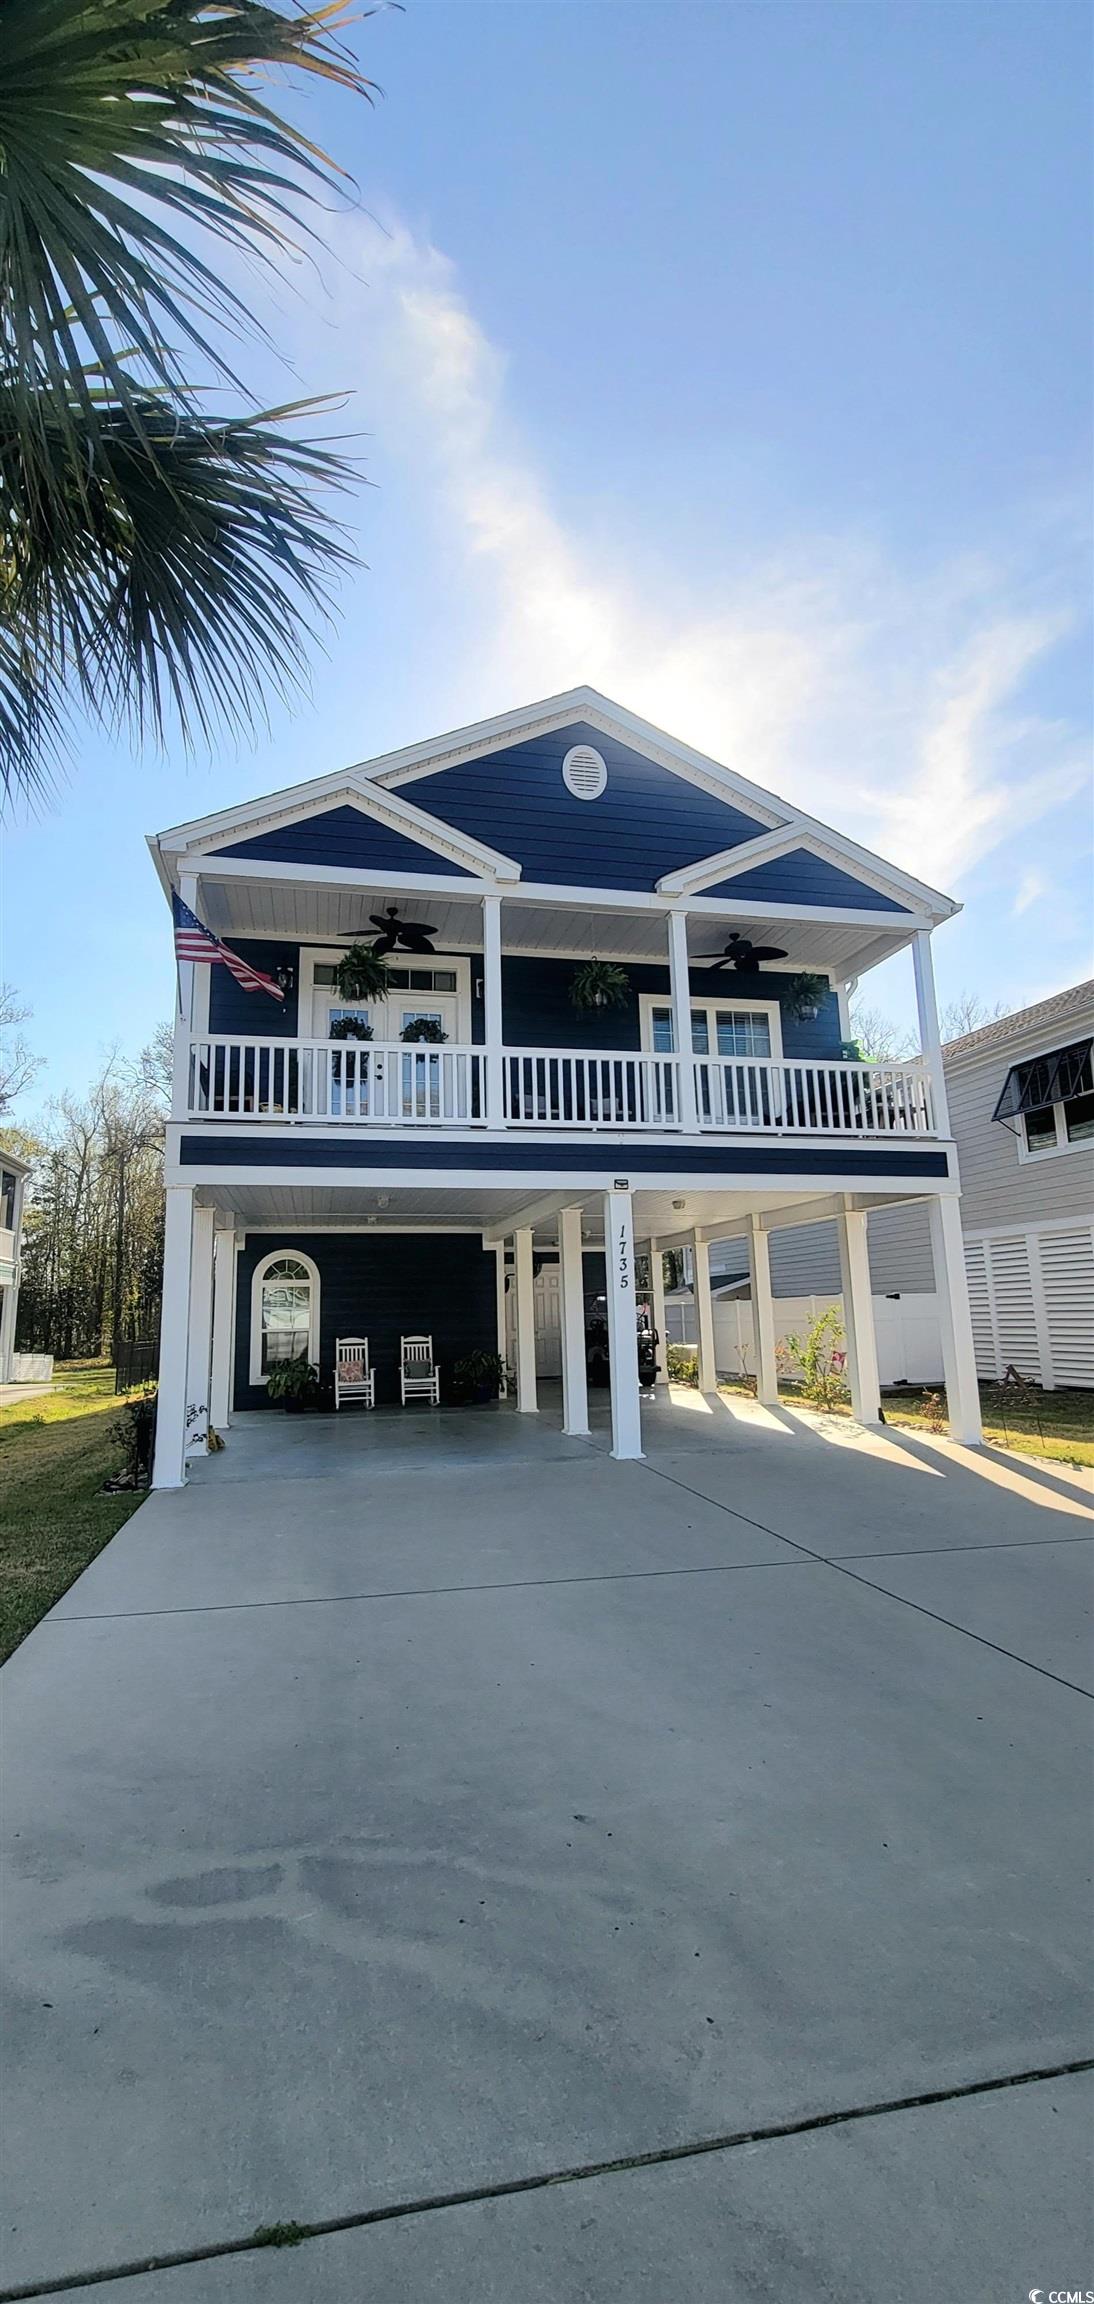 what a beautiful beach home!  so conveniently located to everything that north myrtle beach has to offer and no hoa! this home is well appointed with many upgrades including an elevator and stunning hardwood floors. with an open concept floor plan, 3 bedrooms and 3 full baths, you will be able to entertain many family and friends during those long summer days. the 1st floor has a large family room and one of the full baths making it very convenient.  there's a large covered front porch, a rear screened in porch, and yet another covered porch to enjoy the serenity of your fenced in yard and custom built fire pit!  underneath this raised home is also a great place to entertain and keep you in the shade! a very short golf cart drive to cherry grove beach and a very short drive to the icw. schedule a showing today!